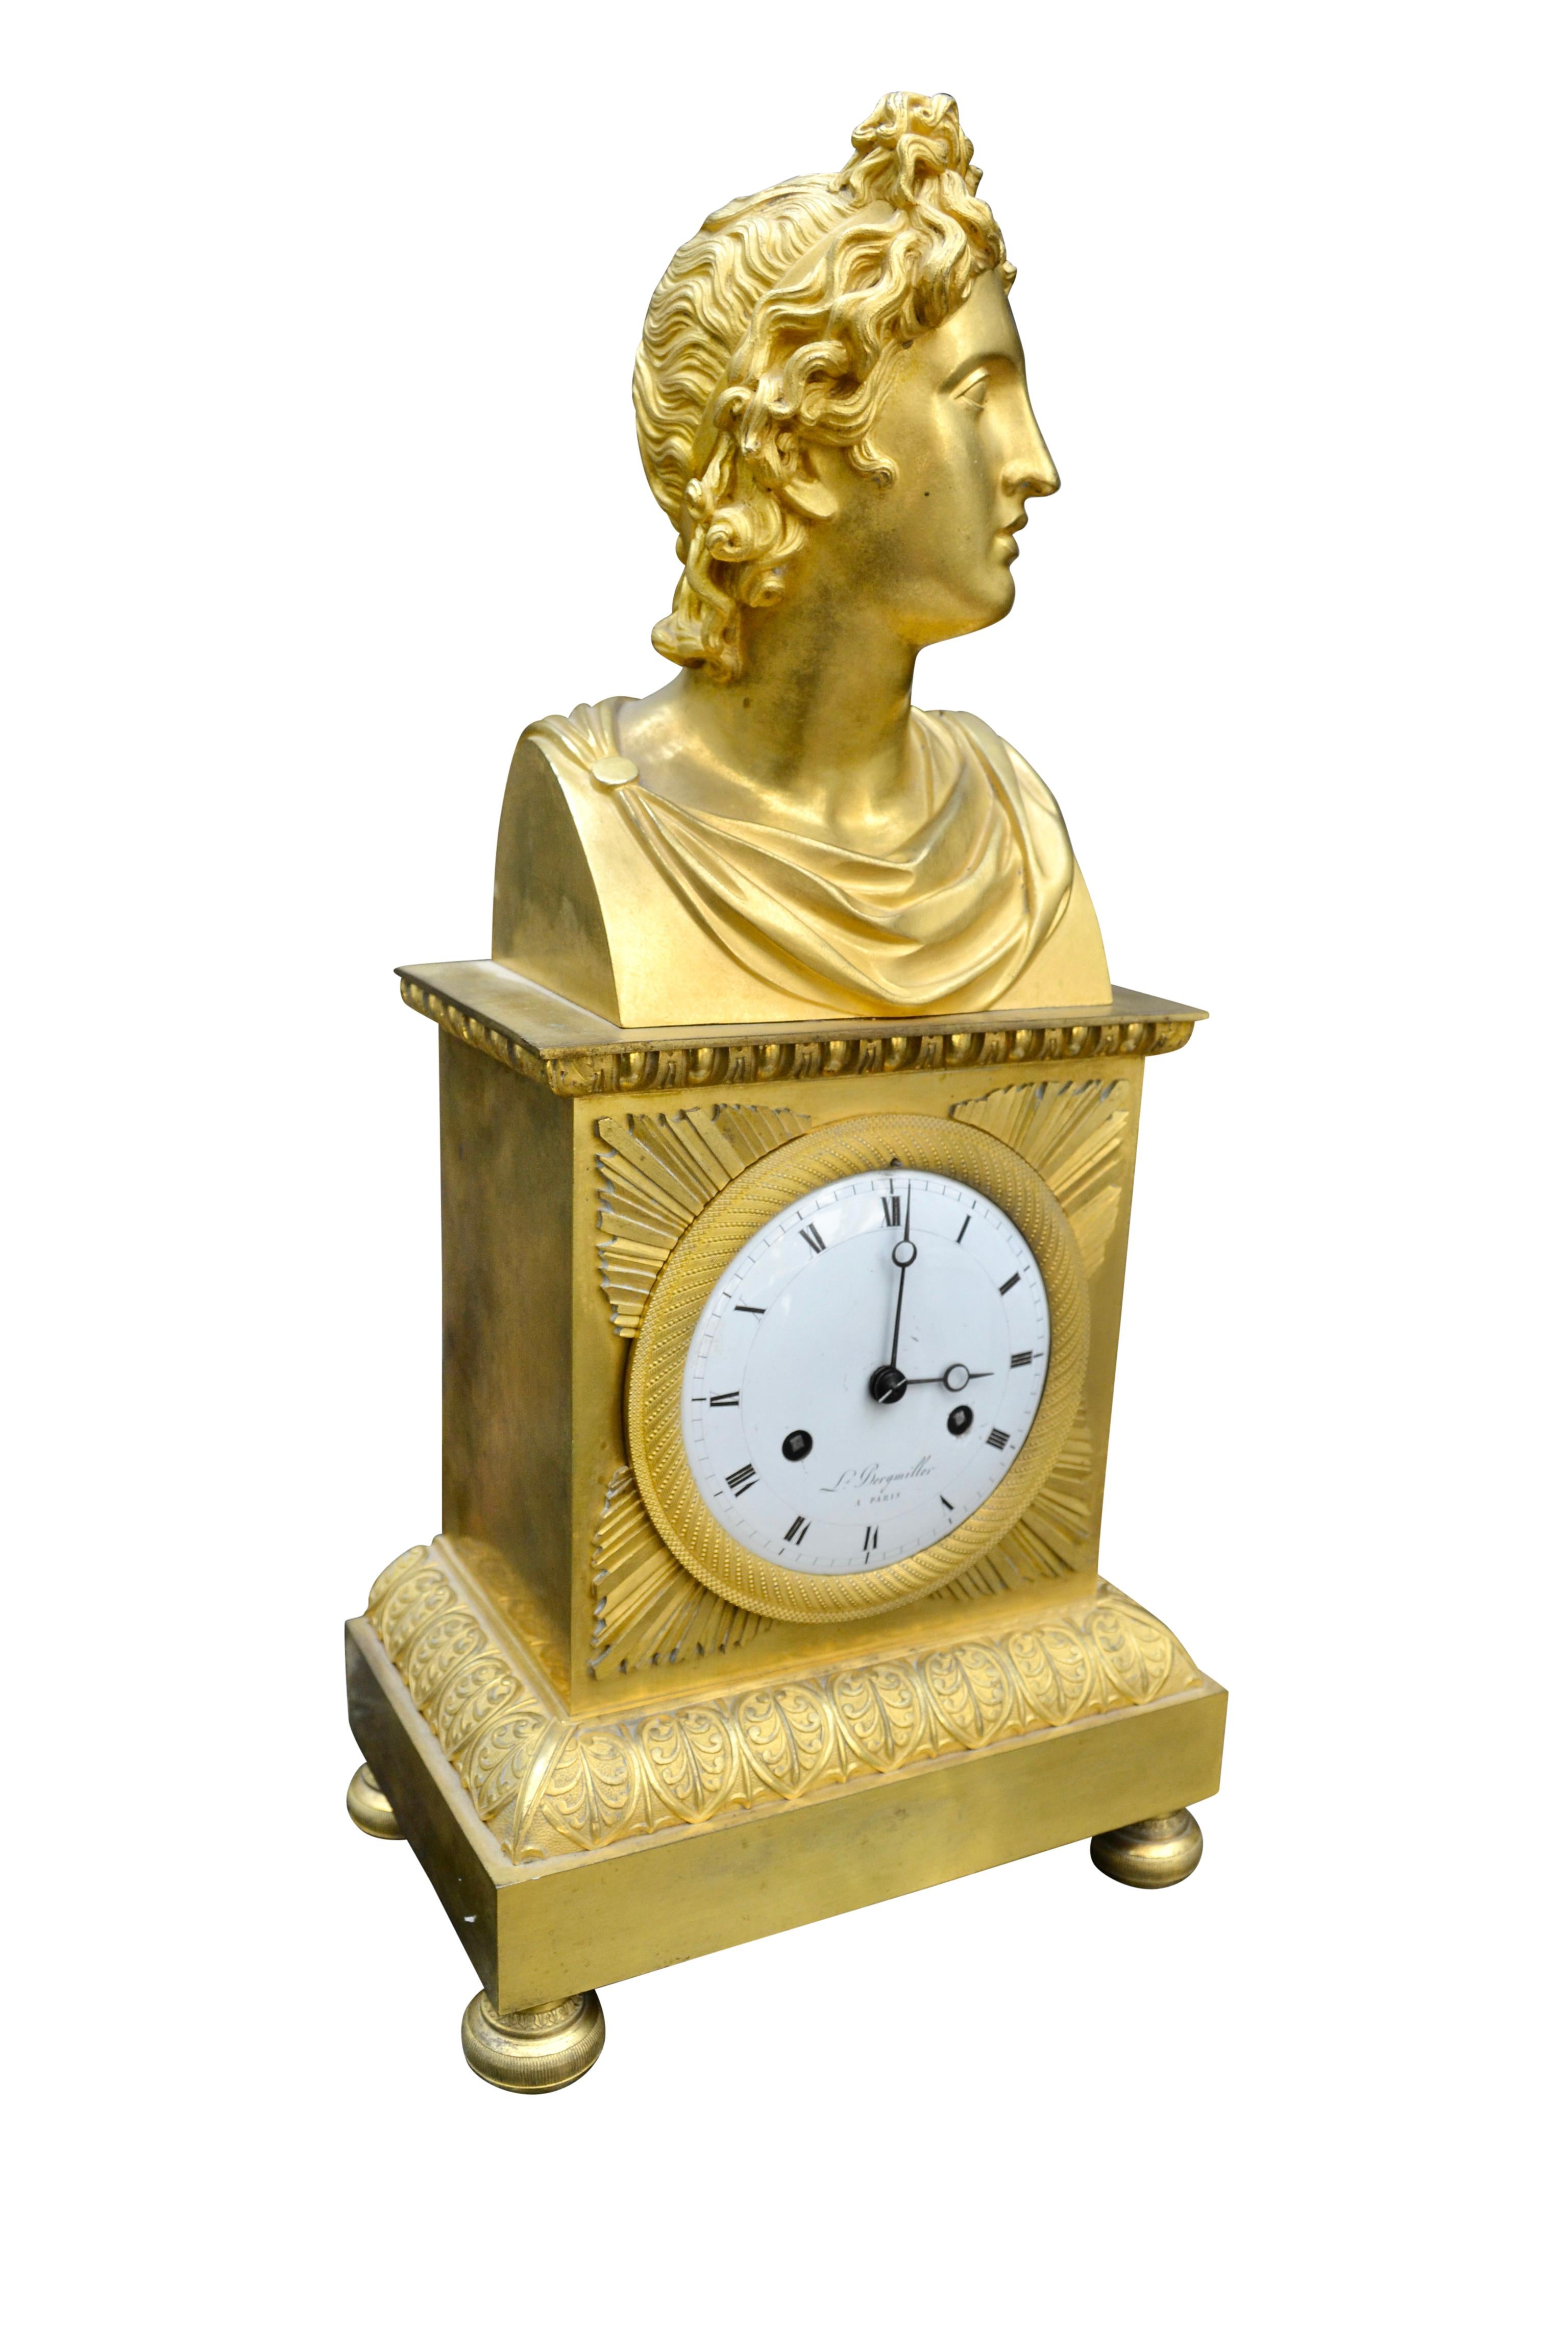 A period French Empire Apollo Belvedere mantle clock in gilt bronze, the rectangular plinth on a stepped base richly decorated with acanthus. The plinth itself houses the large white enamel dial signed “L. Bergmiller A PARIS”; the original movement